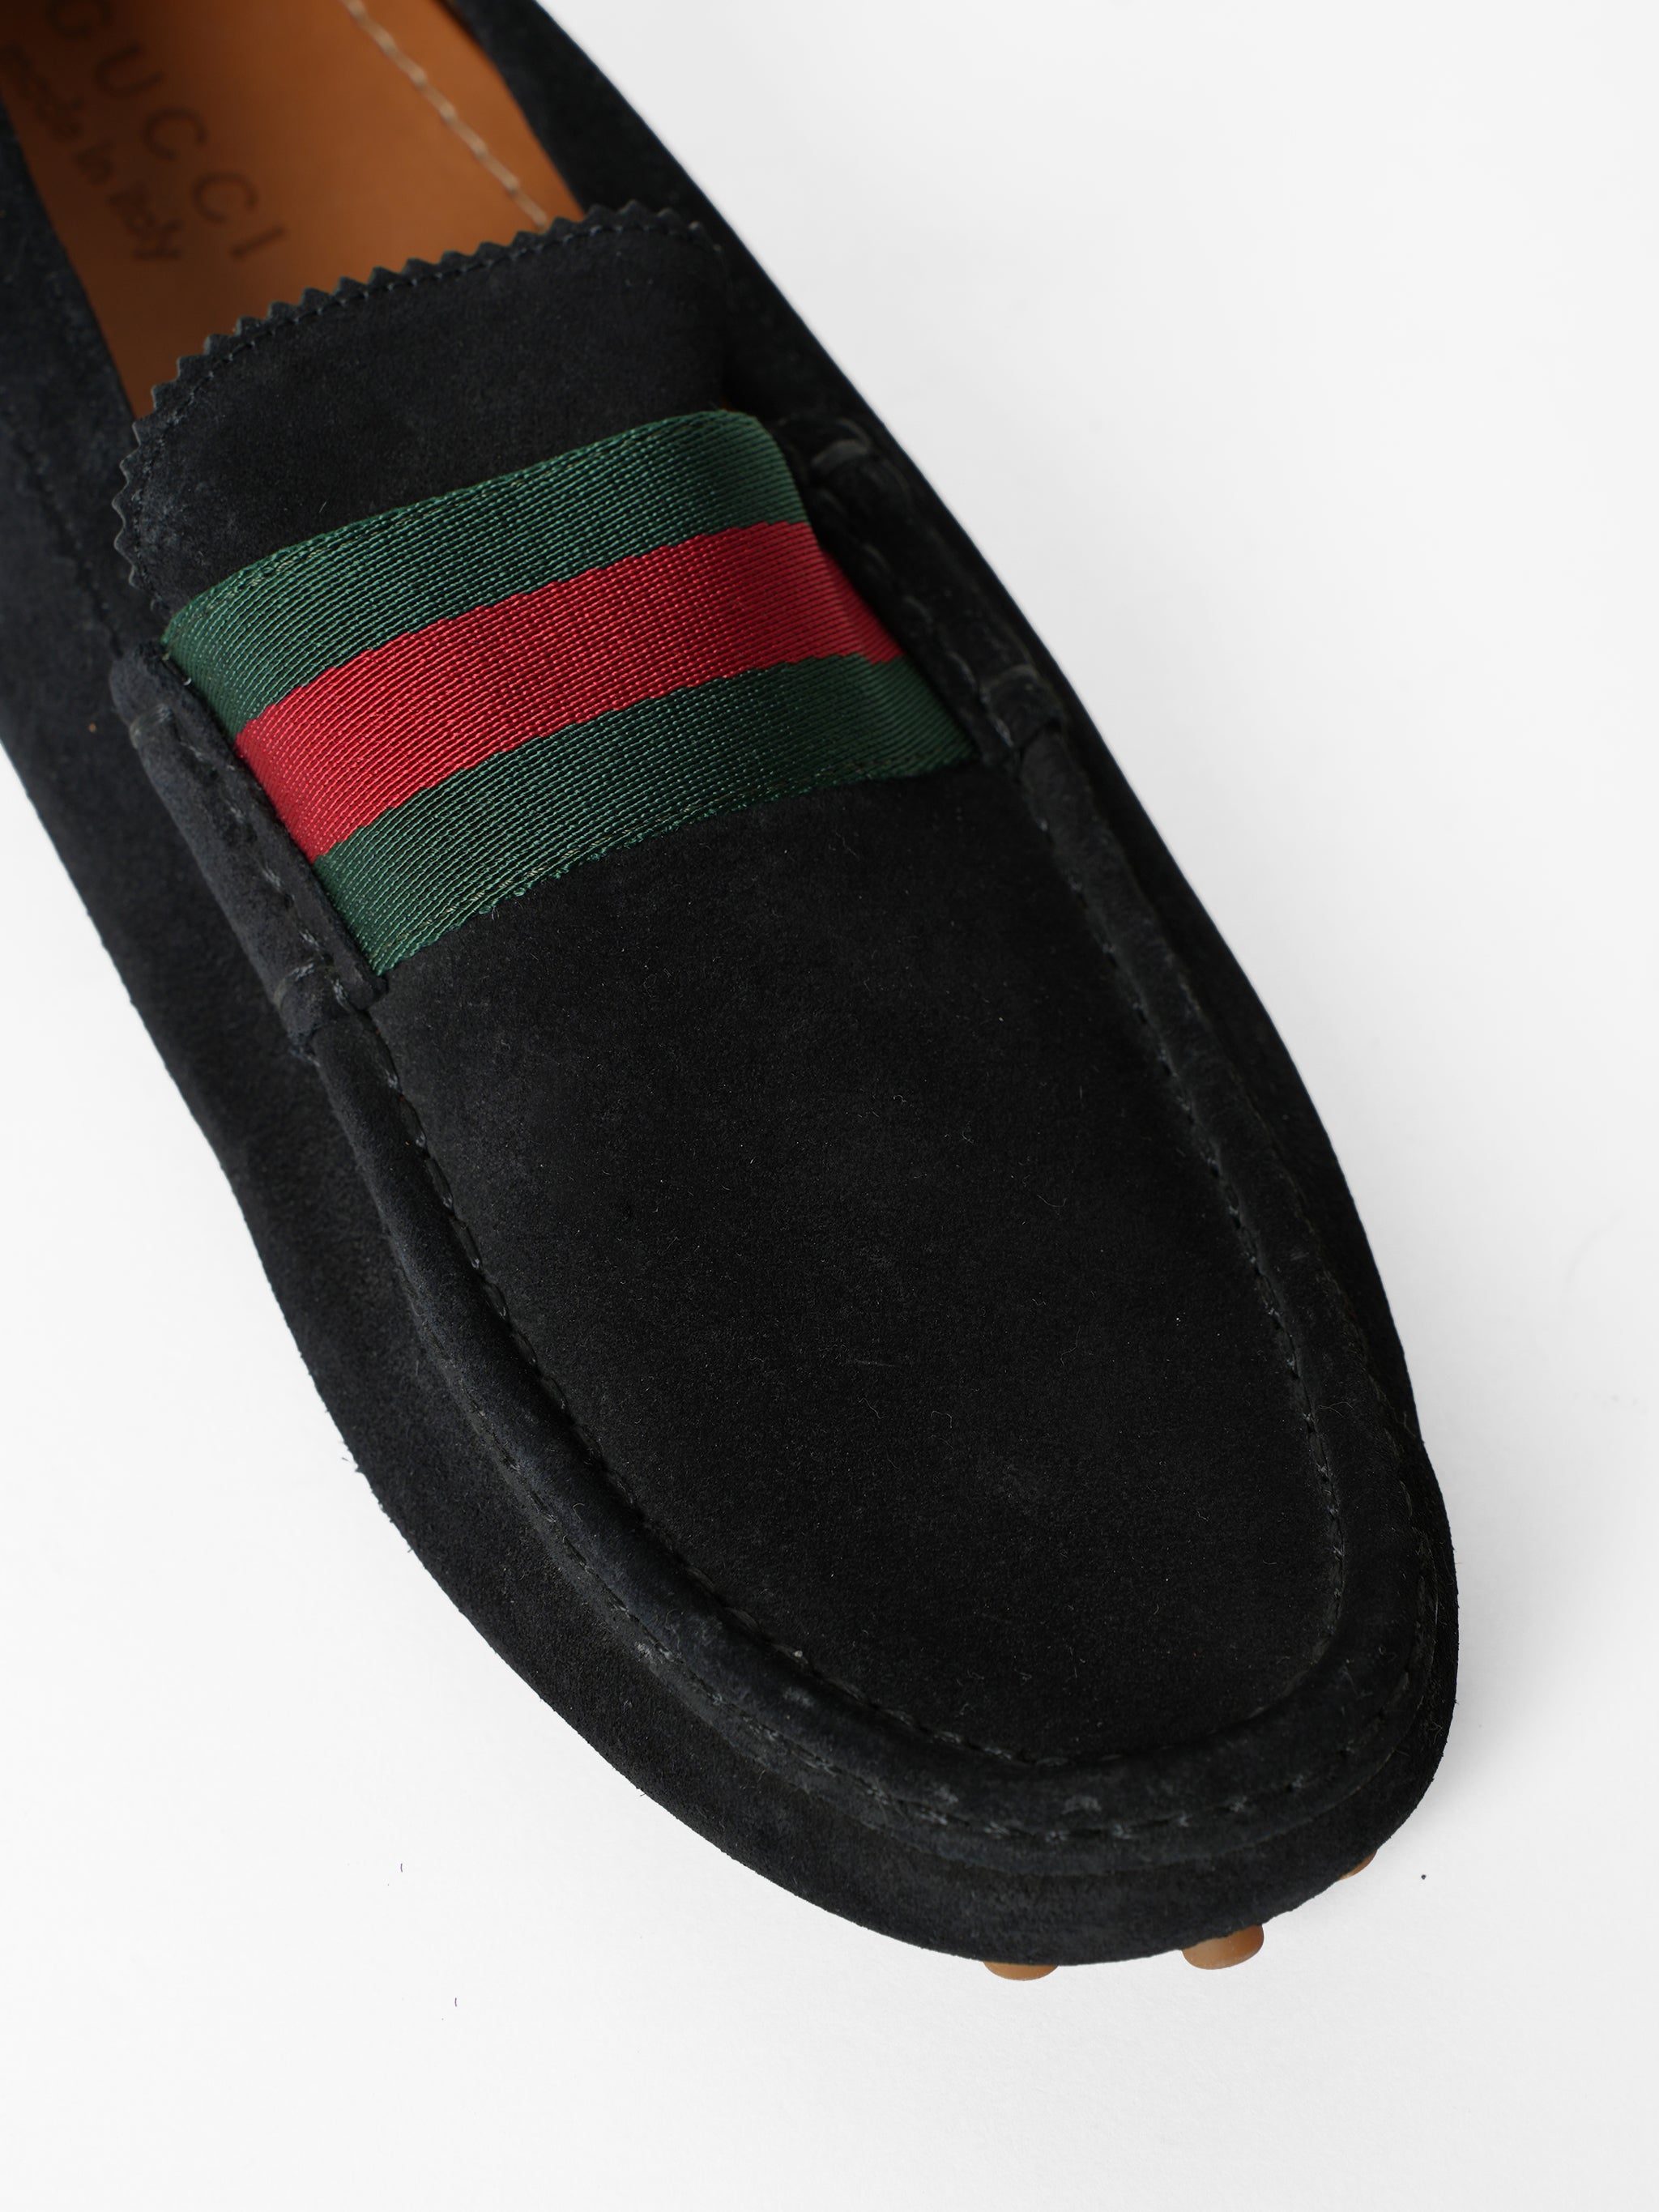 New Gucci Black Suede Shoes